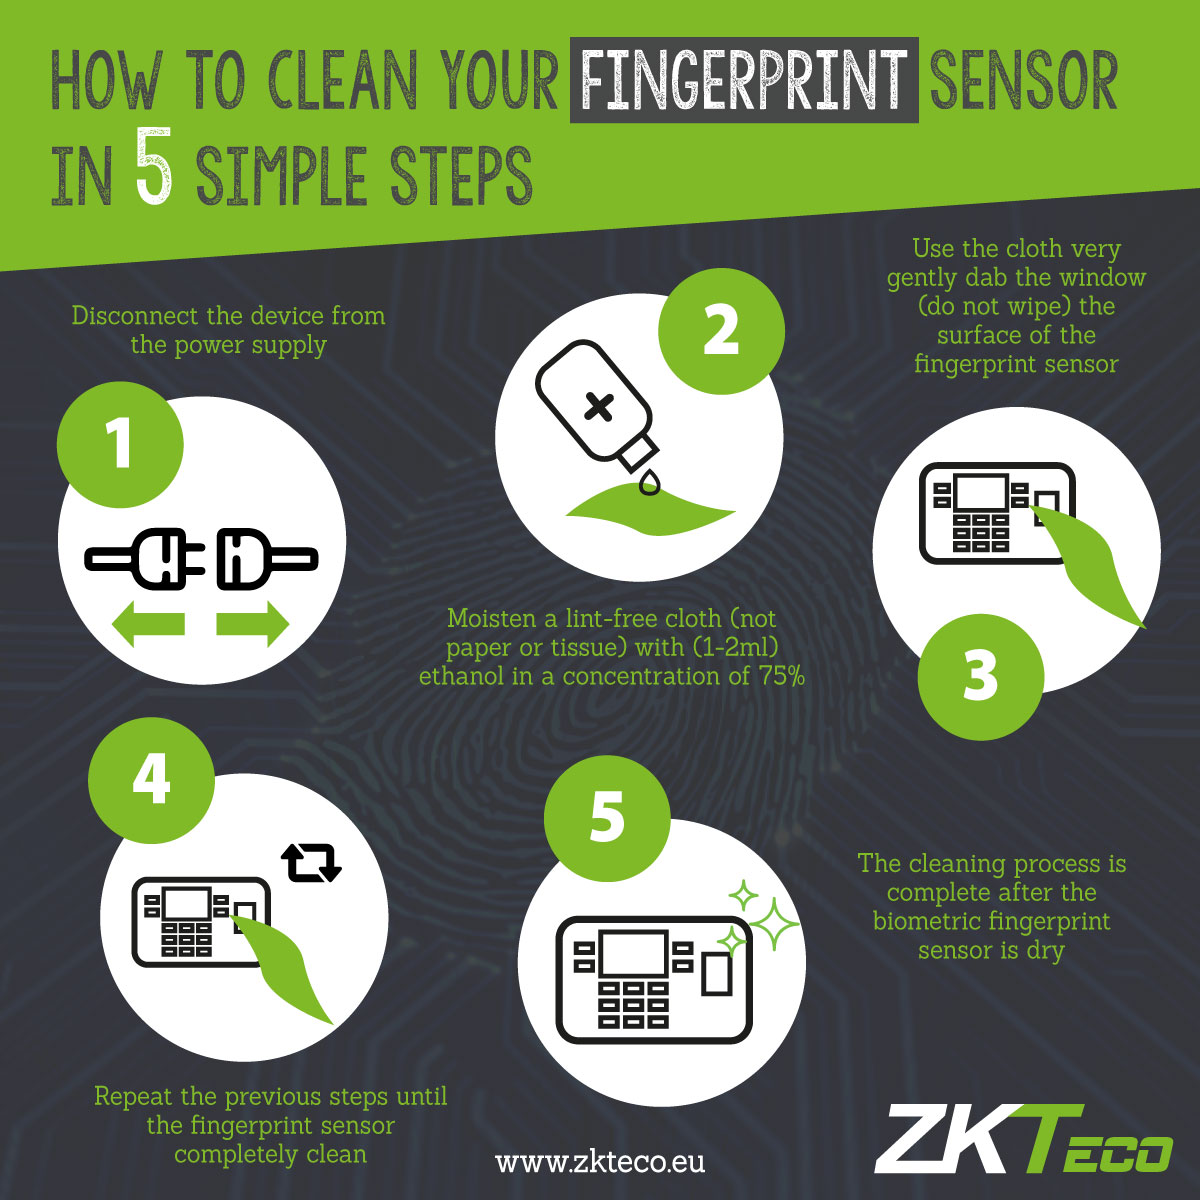 ZKTeco Europe How to clean a fingerprint sensor in 5 simple steps infography